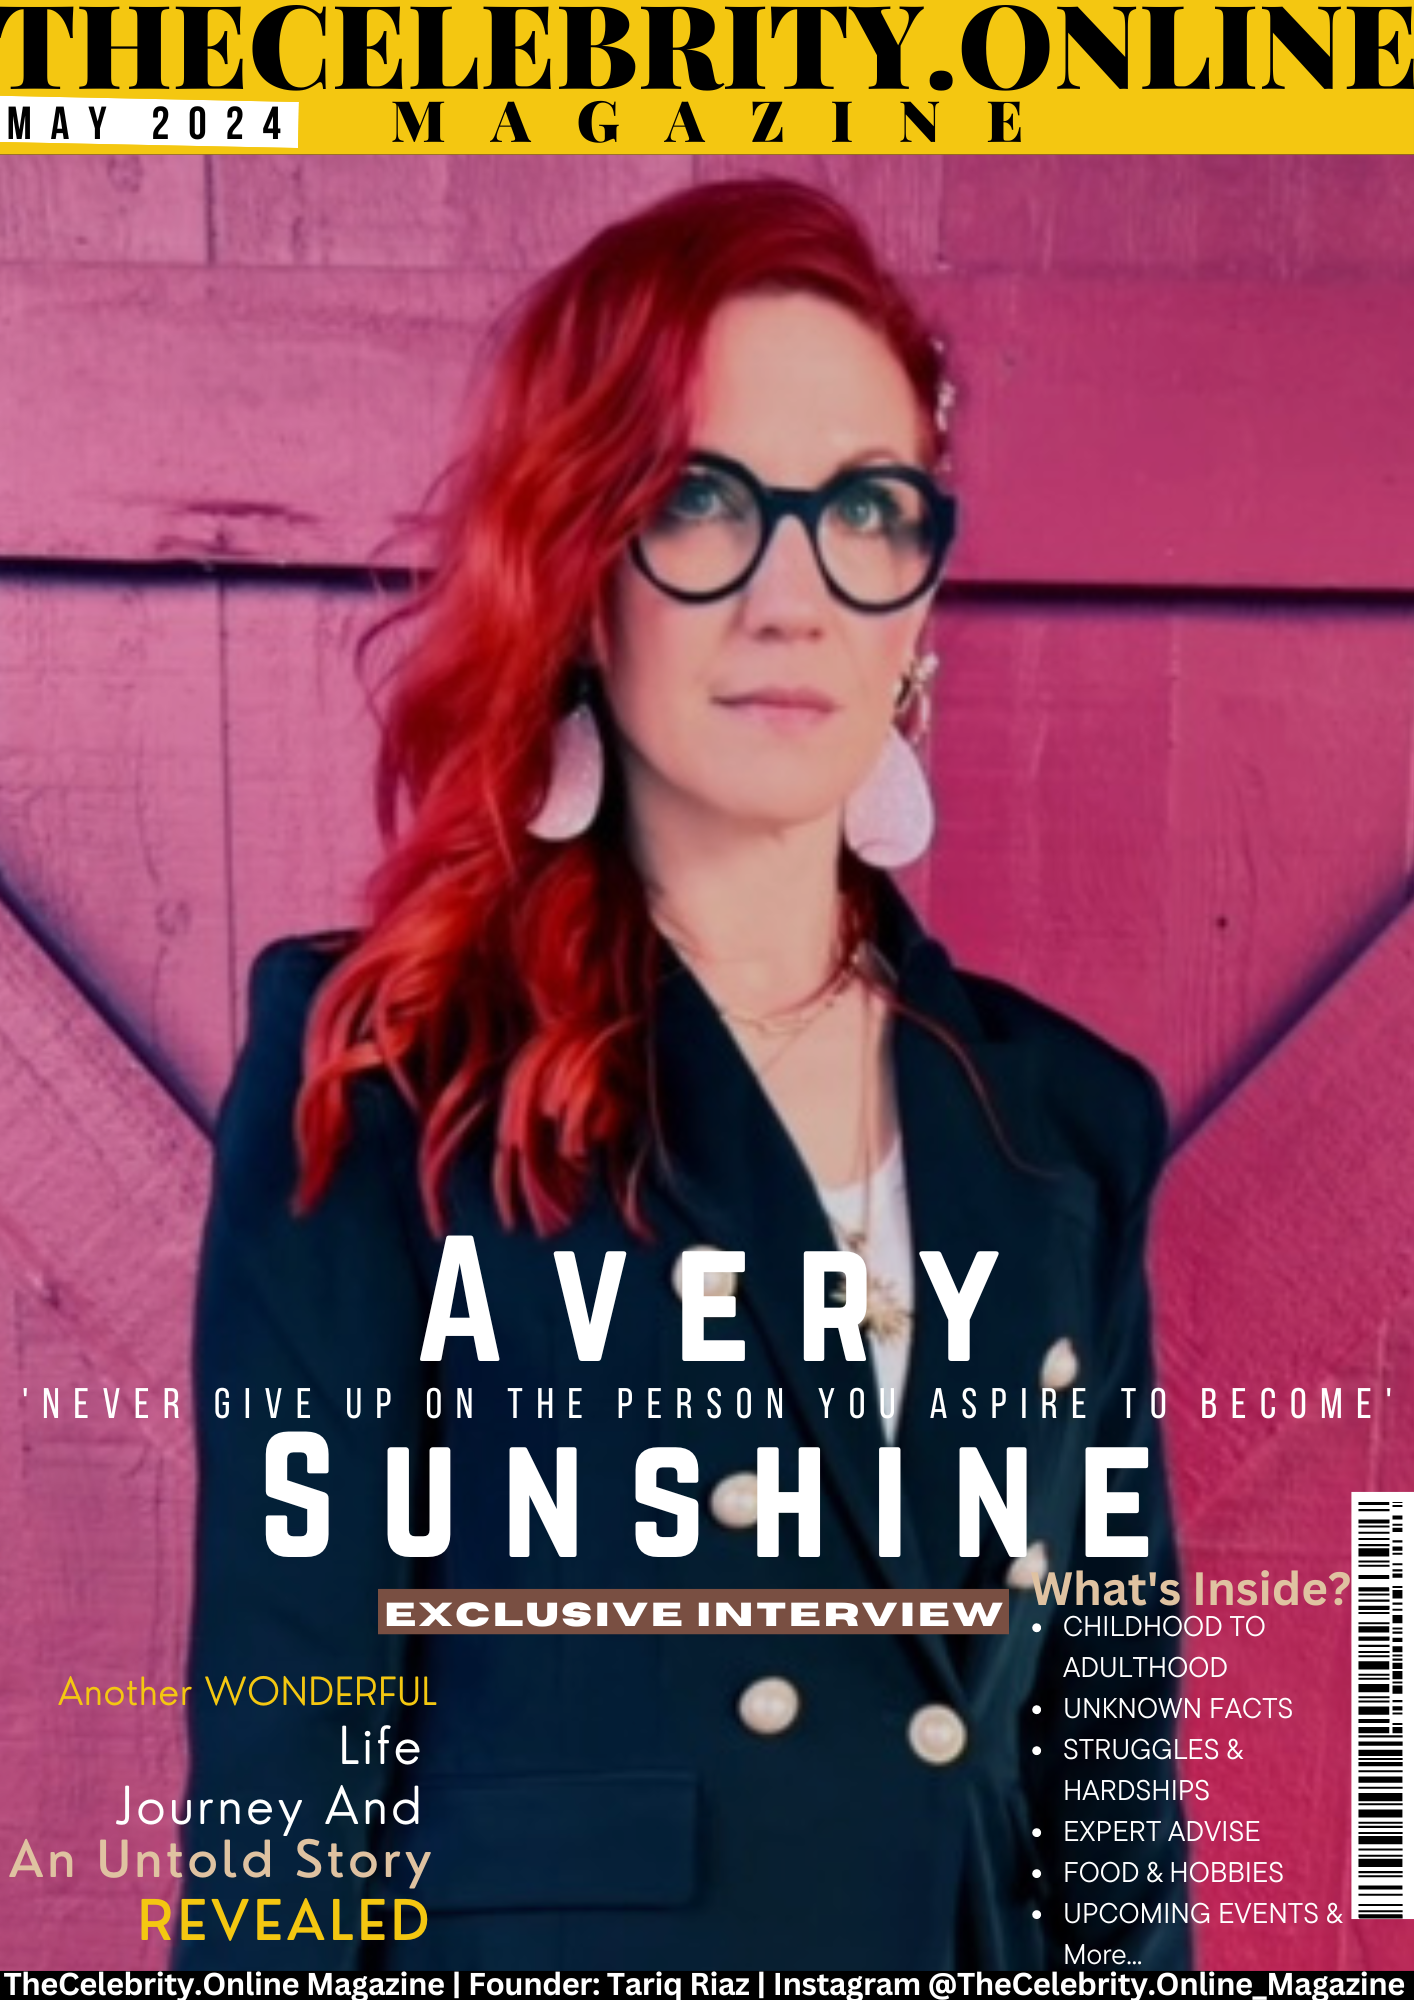 Avery Sunshine Exclusive Interview – ‘Never Give Up On The Person You Aspire To Become’